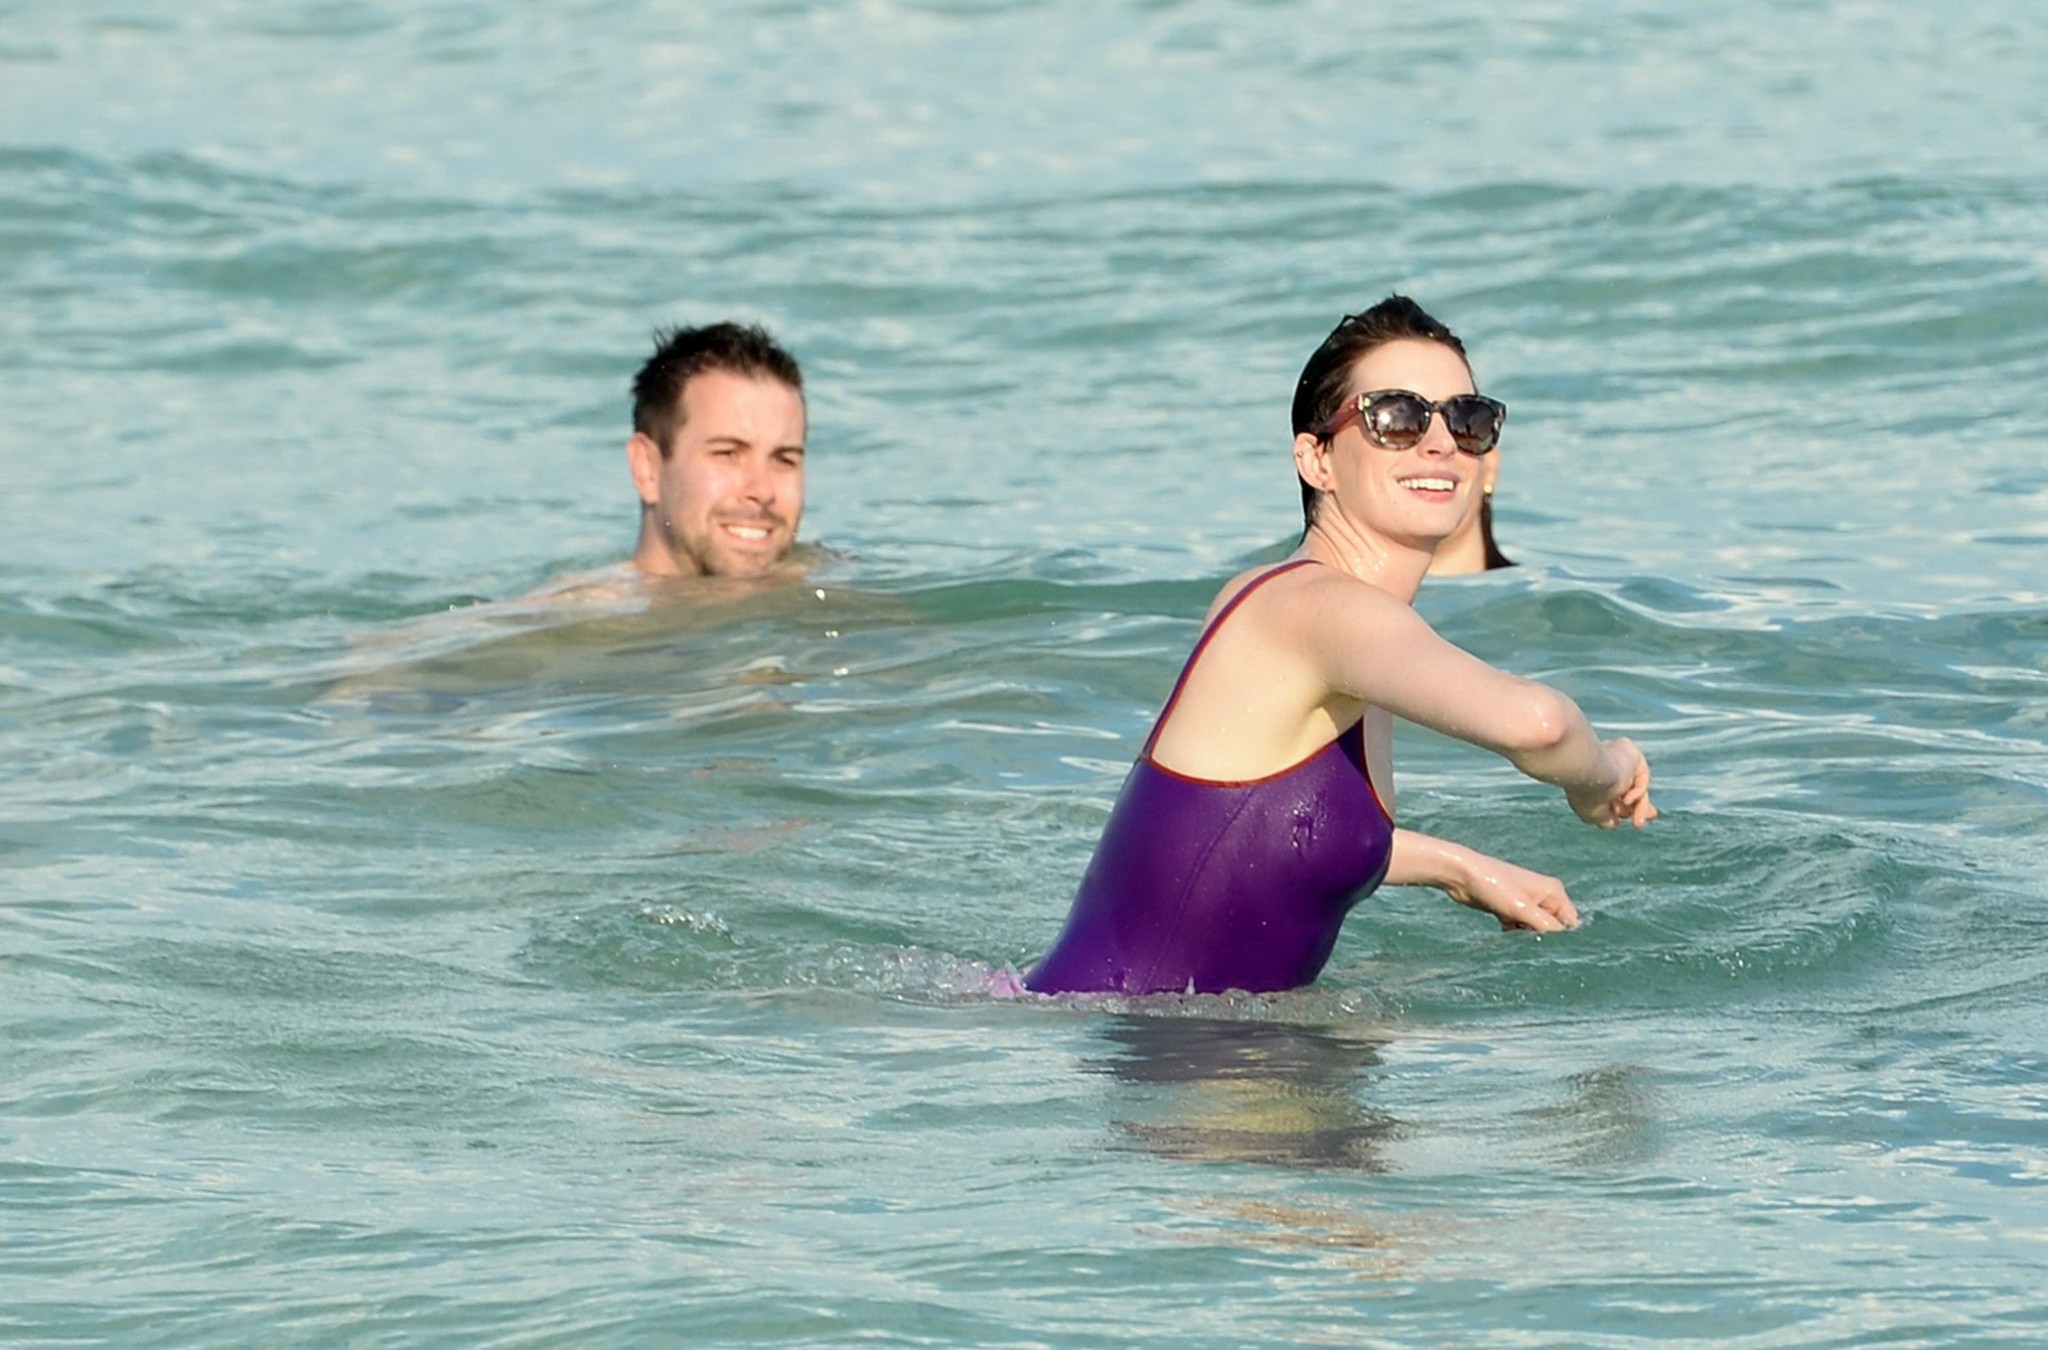 Anne Hathaway wearing wet purple see-through swimsuit and shorts at the beach in #75201002